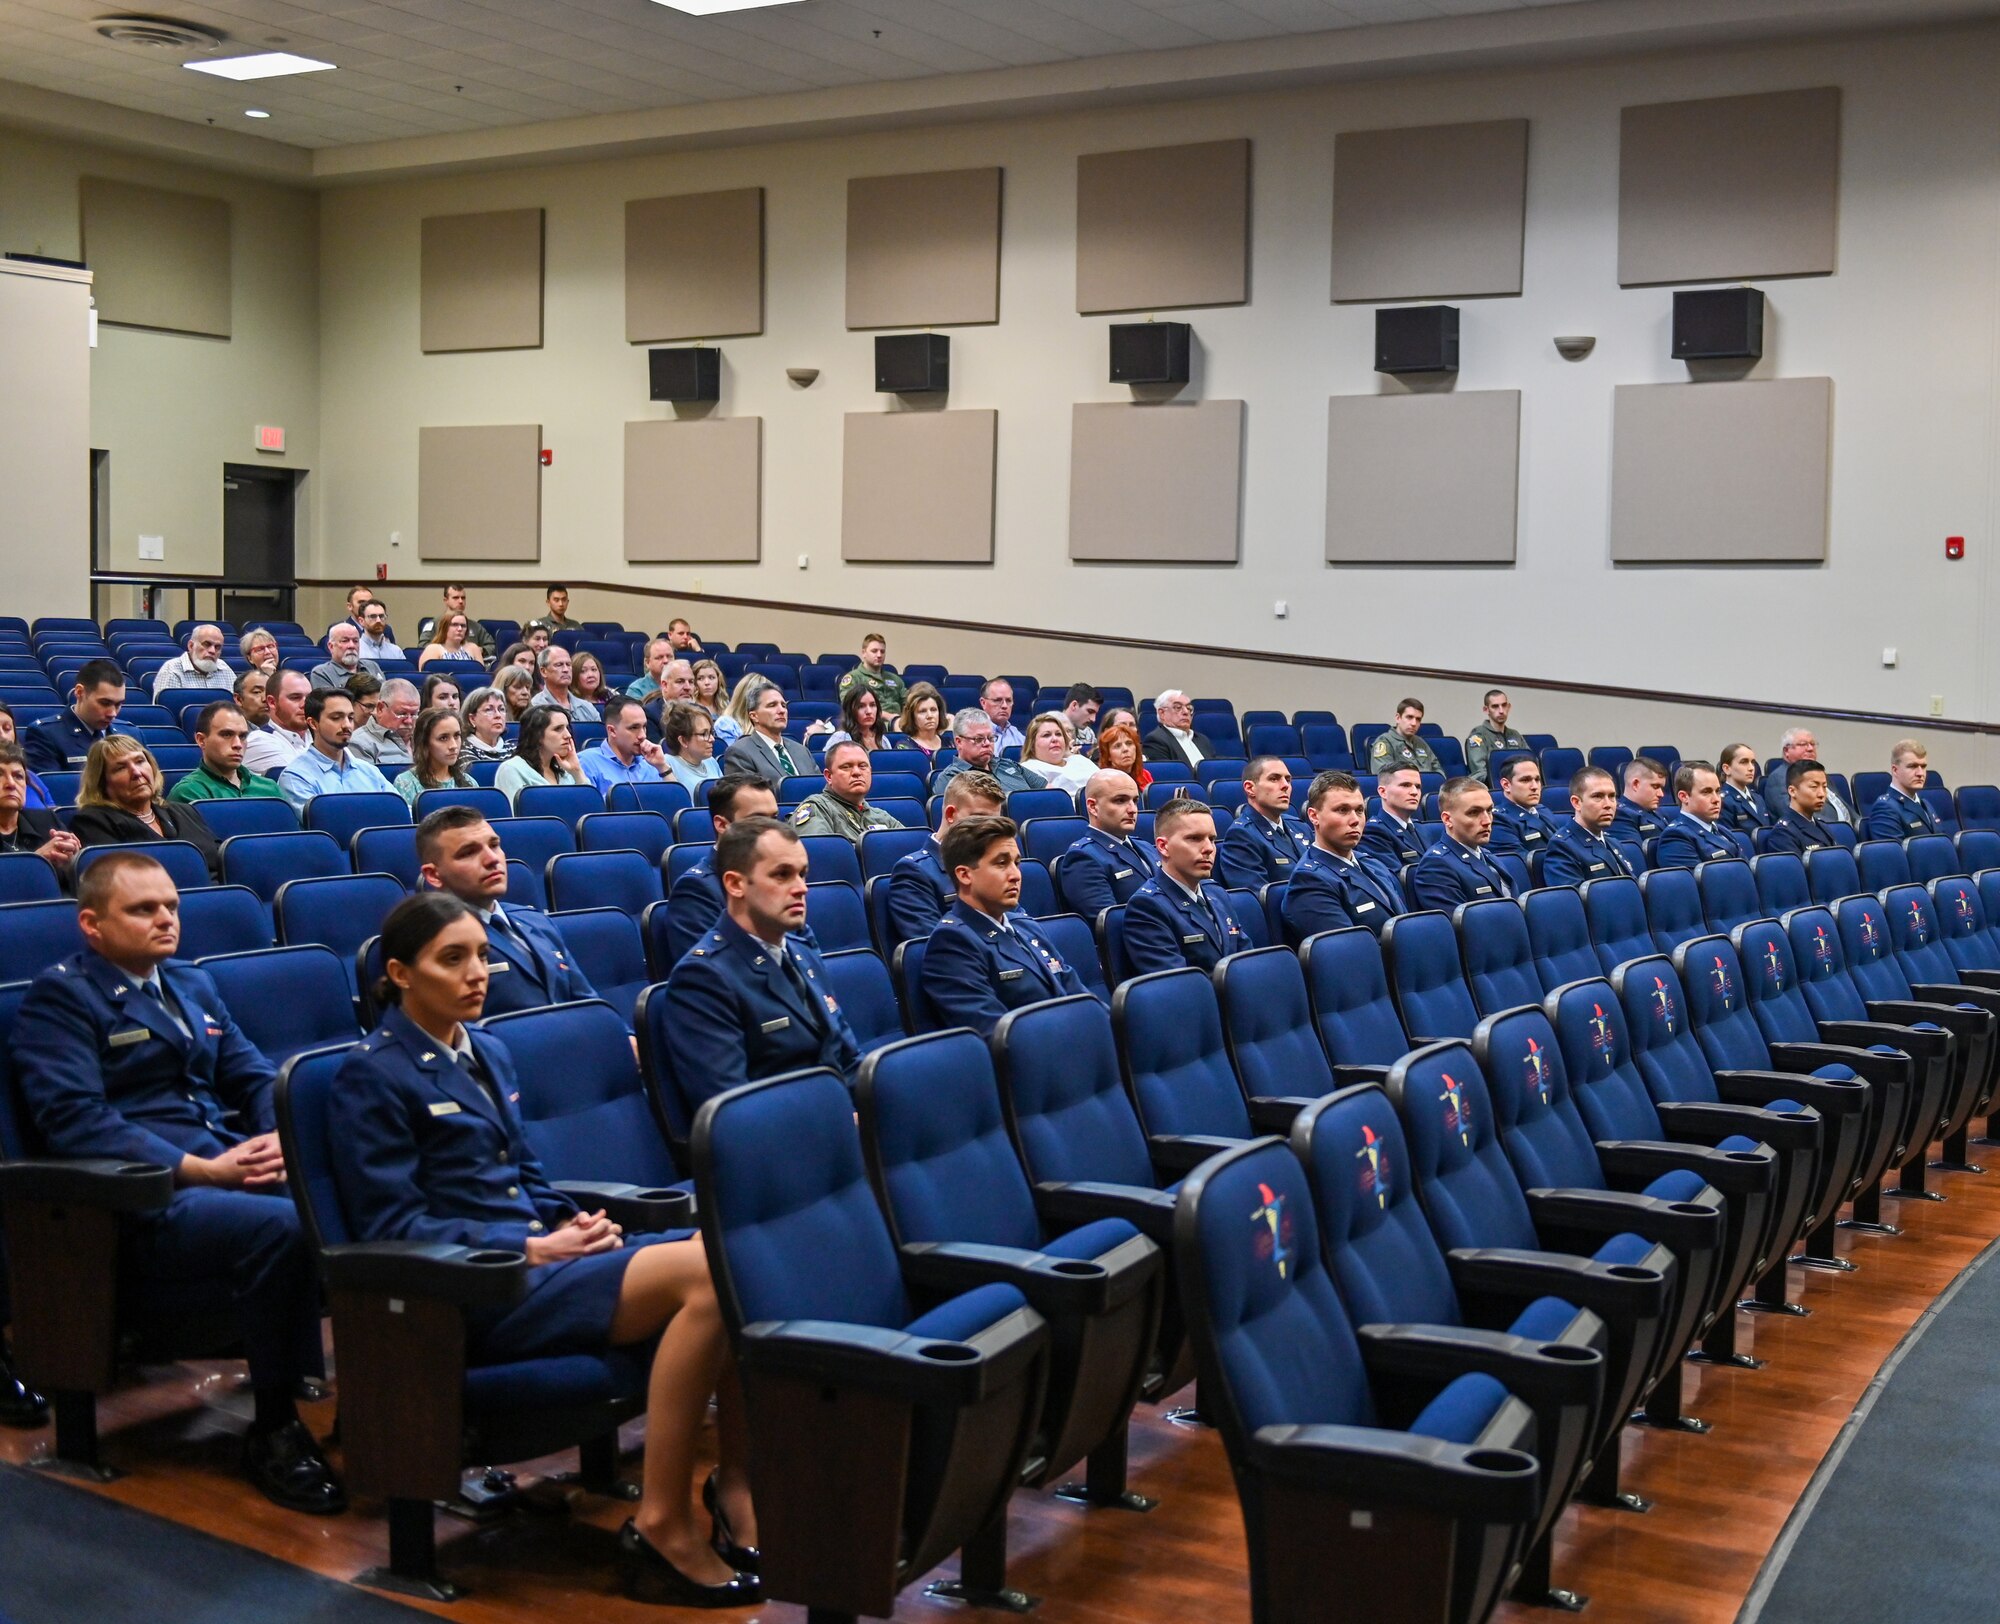 Specialized Undergraduate Pilot Training Class 22-06 sits at their graduation ceremony on March 4, 2022, at Columbus Air Force Base, Miss. The class graduated with 21 new, world-class pilots. (U.S. Air Force photo by Senior Airman Davis Donaldson)